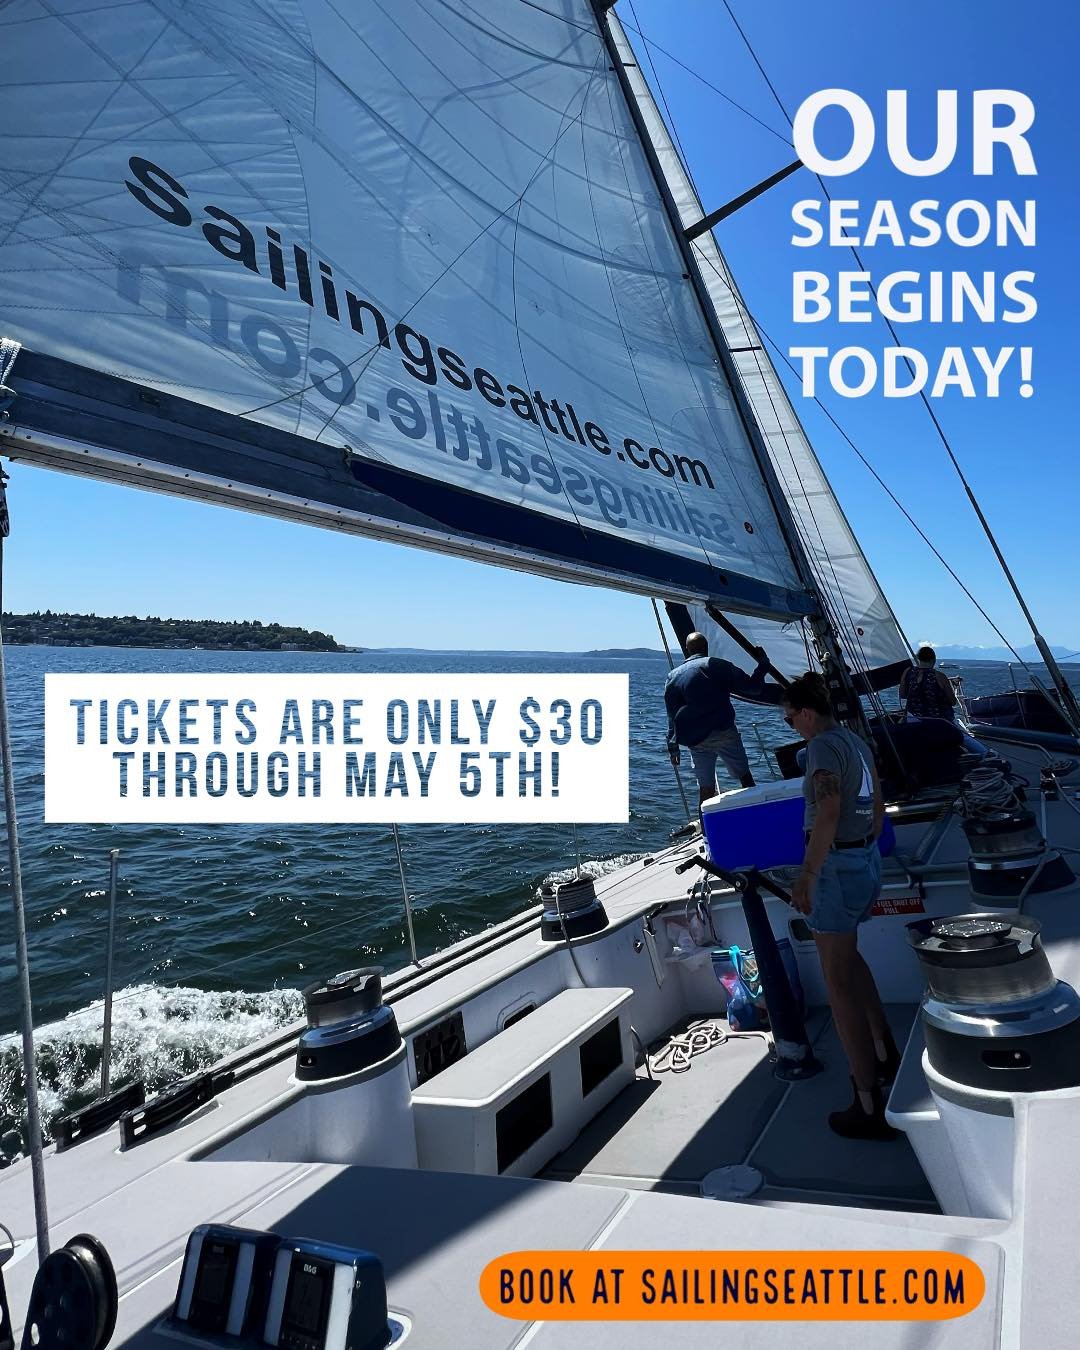 Happy opening day of sailing season! Forecast is calling for sun, a high of 60 degrees, and wind gusts up to 12mph. So a perfect day for sailing! Come on down to Pier 56 and take advantage of our opening week deals. Only $35 for the 1.5 hour sails an